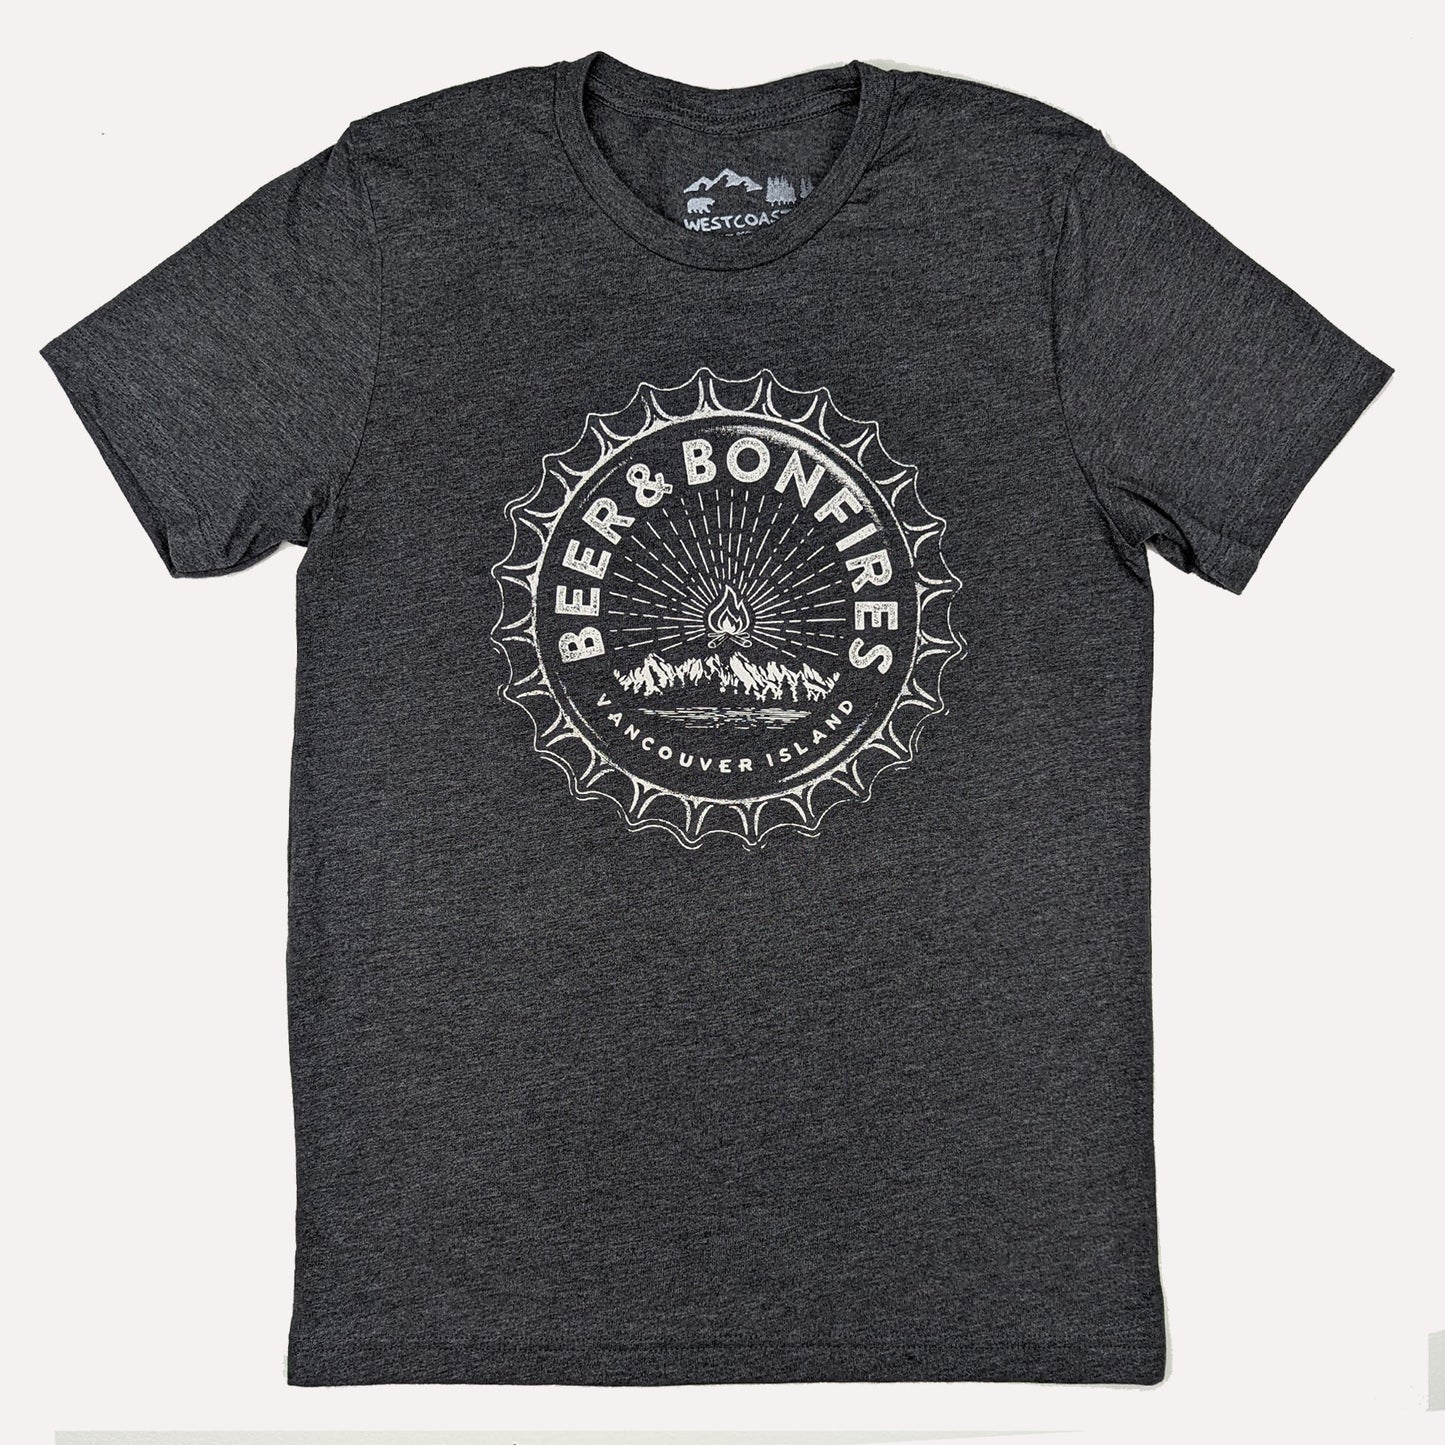 Westcoastees - Adult Unisex Beer and Bonfires Vancouver Island T-shirt